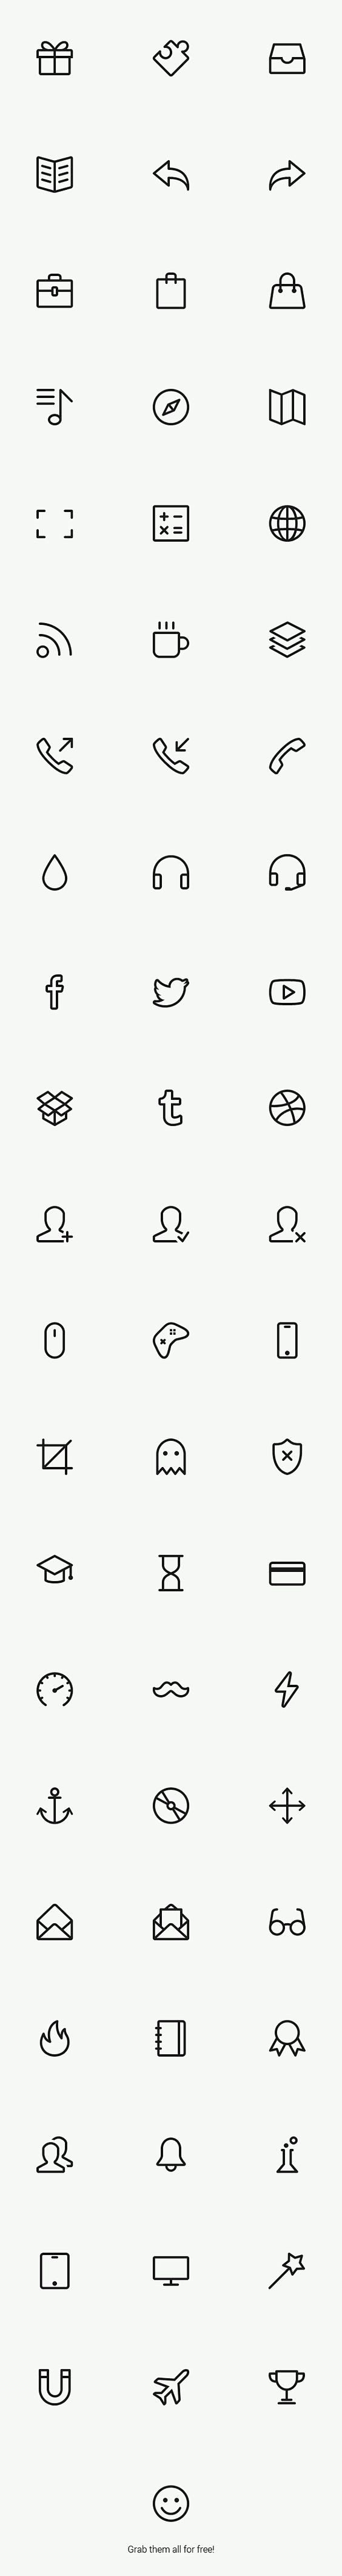 Simple Line Icons (F...